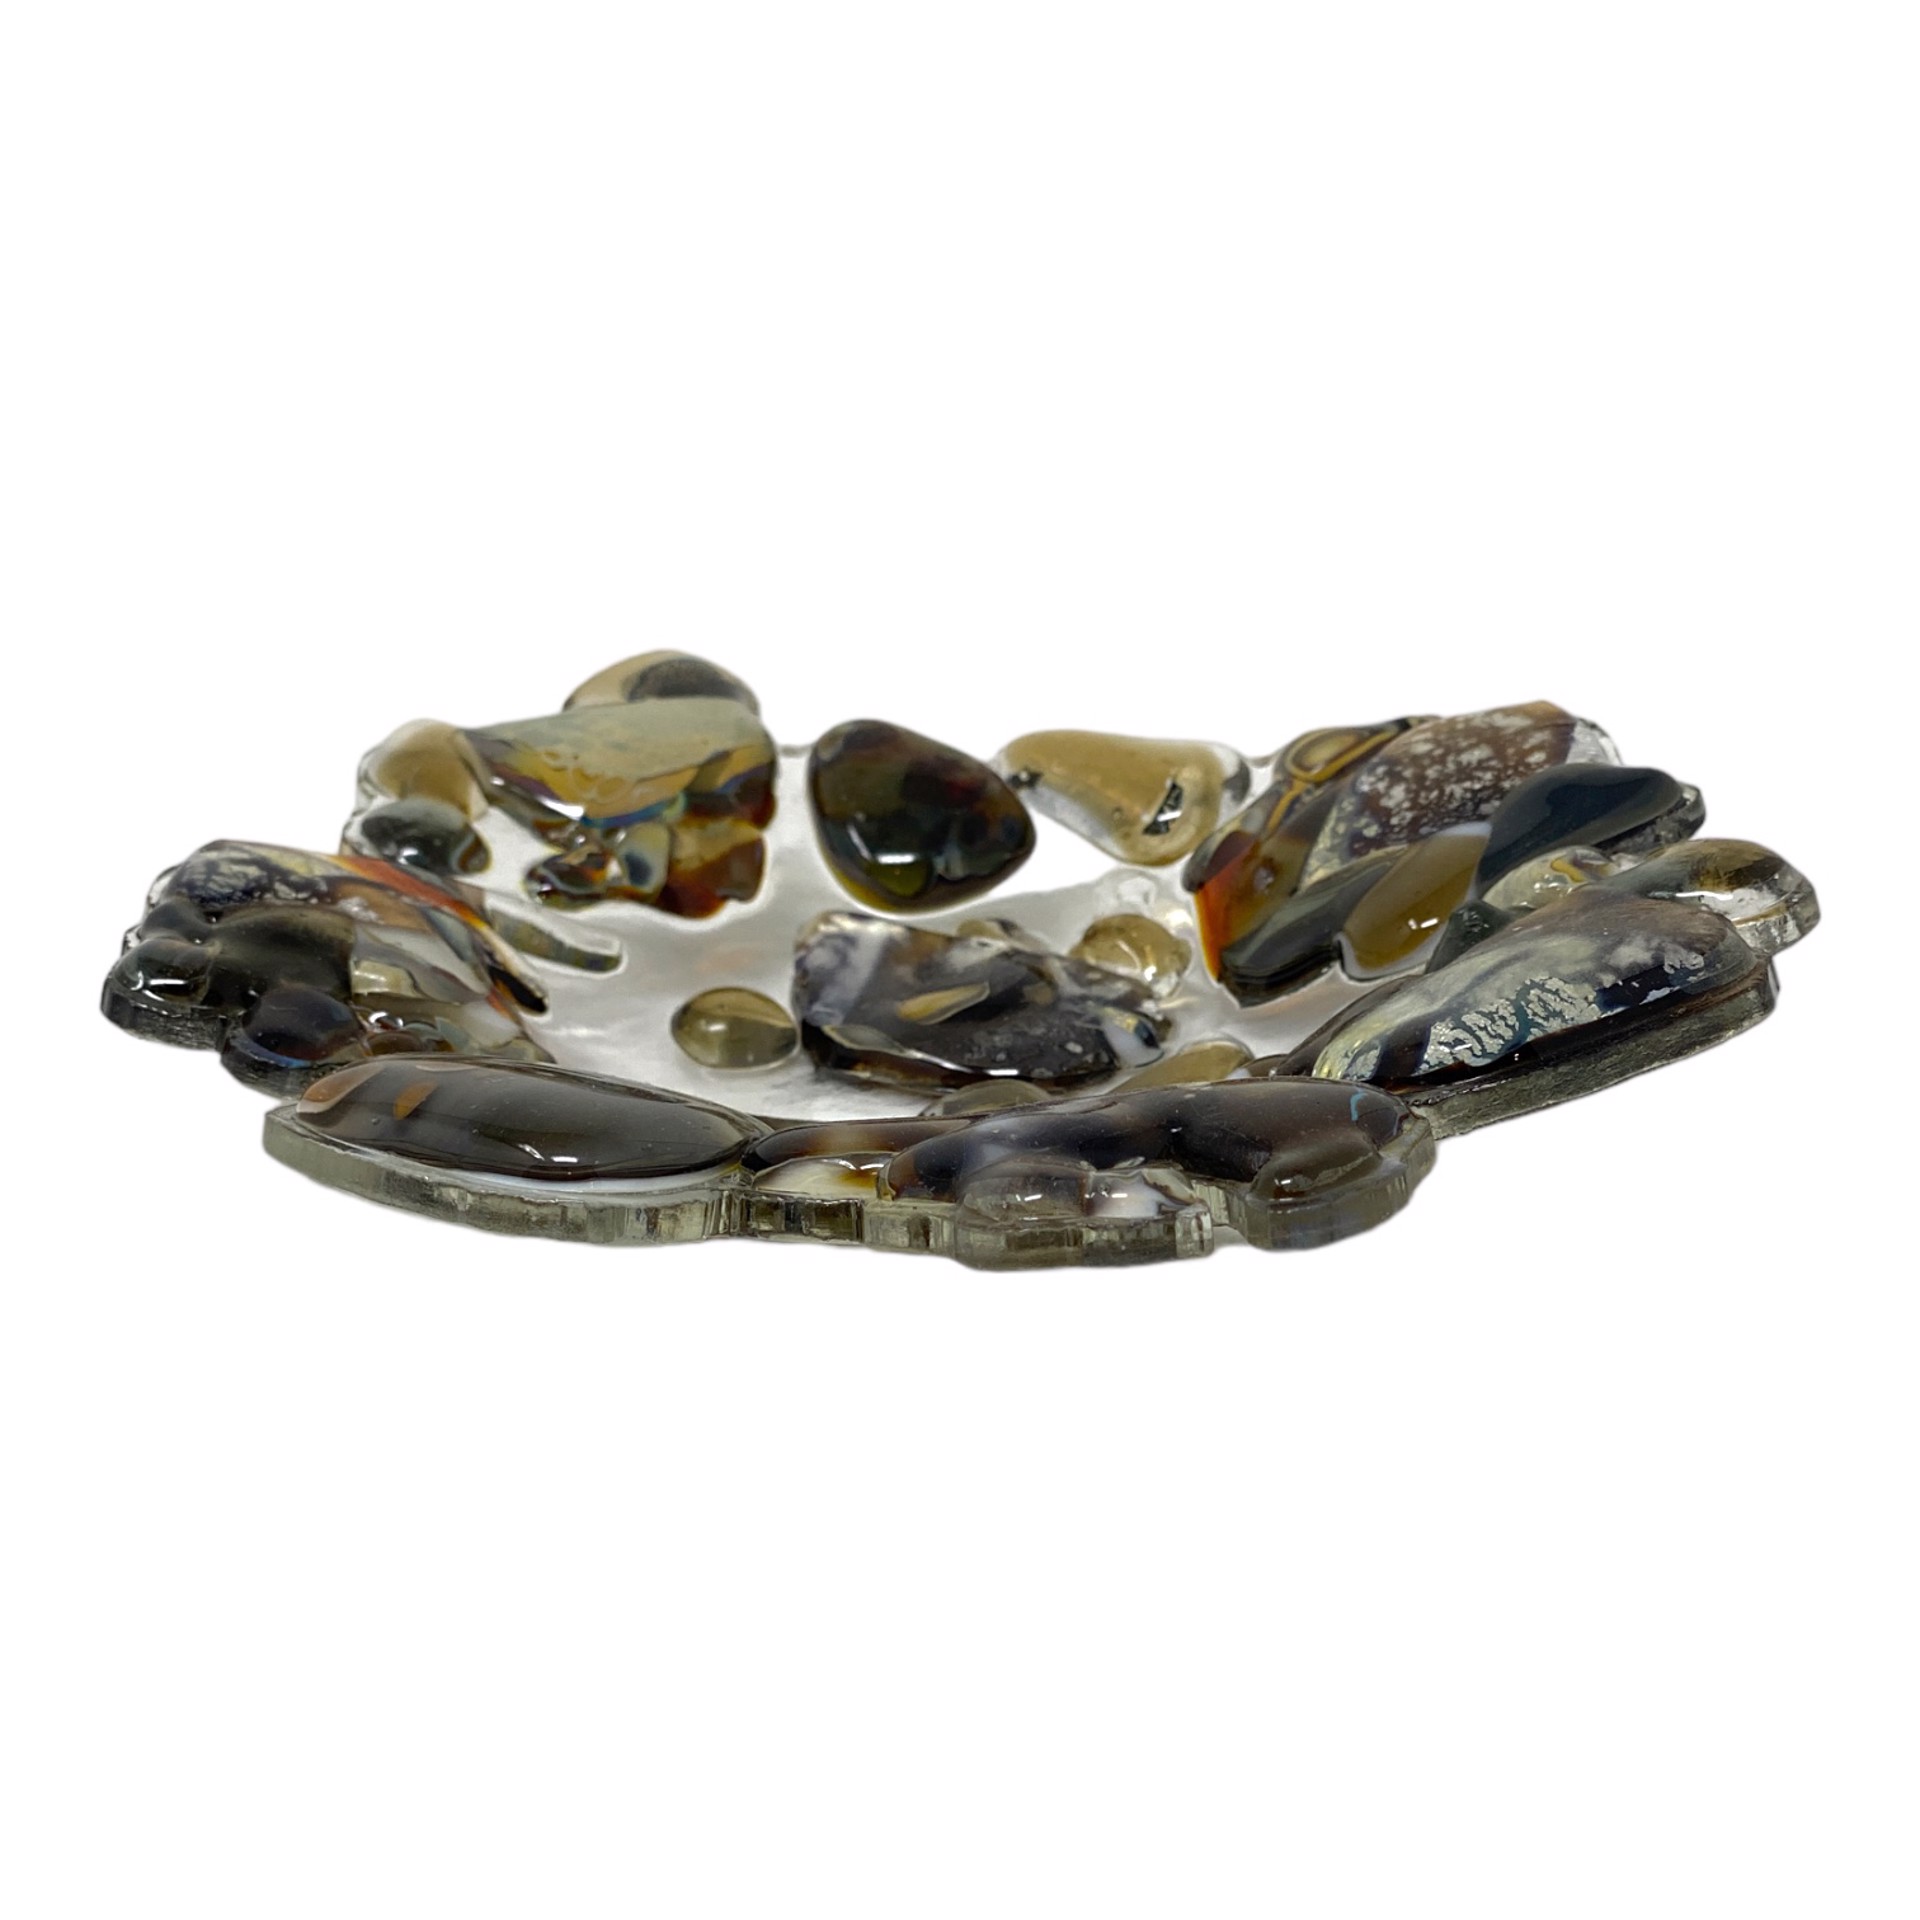 Riverbed Agates by Lois Keister